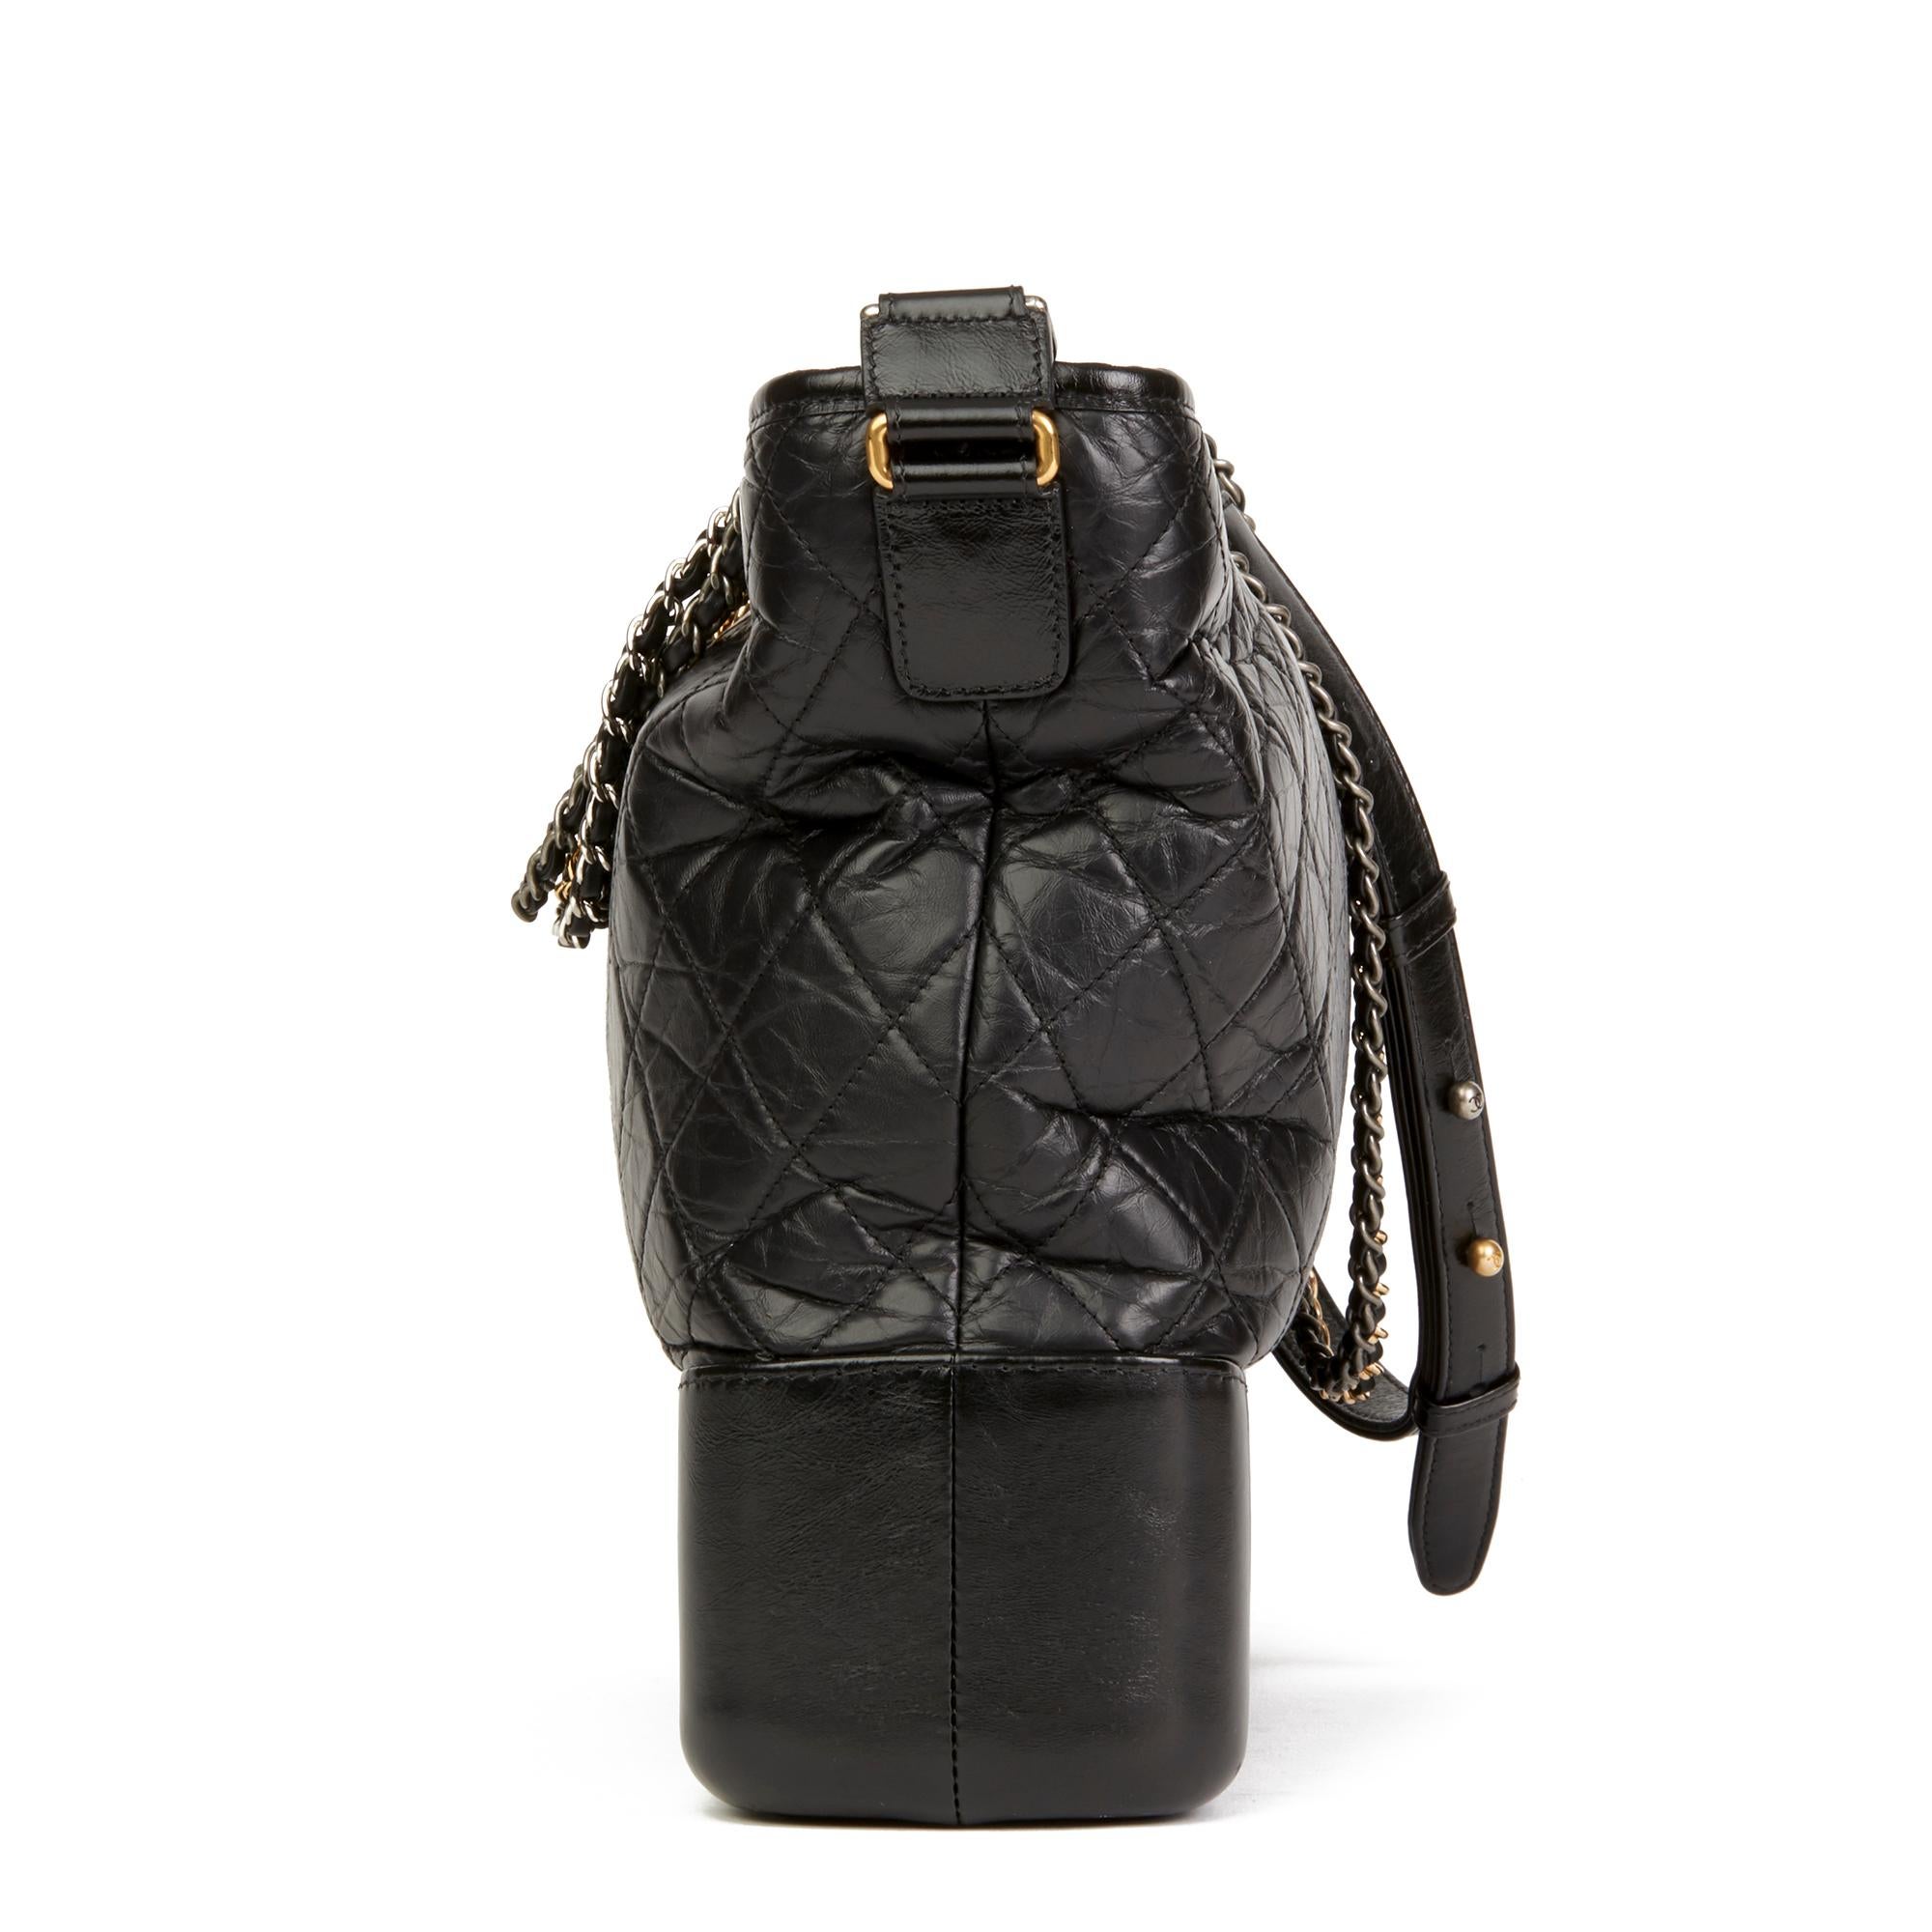 CHANEL
Black Quilted Aged Calfskin Leather Large Gabrielle Hobo Bag

 Reference: HB2800
Serial Number: 24264363
Age (Circa): 2017
Accompanied By: Chanel Dust Bag, Authenticity Card, Invoice
Authenticity Details: Serial Sticker, Authenticity Card